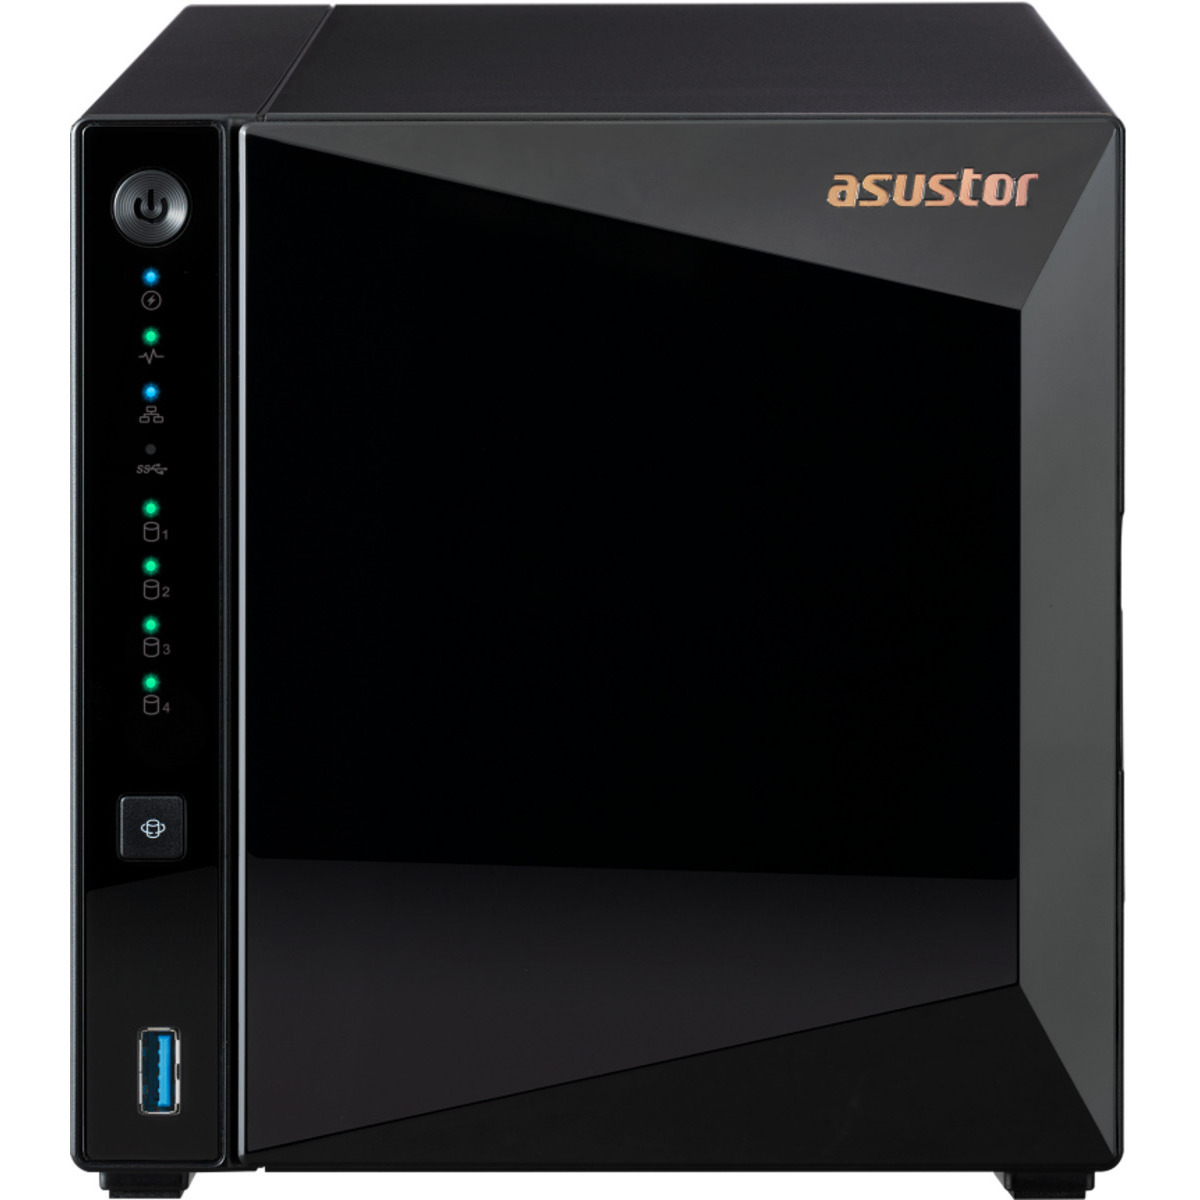 ASUSTOR DRIVESTOR 4 Pro Gen2 AS3304T v2 72tb 4-Bay Desktop Personal / Basic Home / Small Office NAS - Network Attached Storage Device 3x24tb Seagate EXOS X24 ST24000NM002H 3.5 7200rpm SATA 6Gb/s HDD ENTERPRISE Class Drives Installed - Burn-In Tested - ON SALE DRIVESTOR 4 Pro Gen2 AS3304T v2